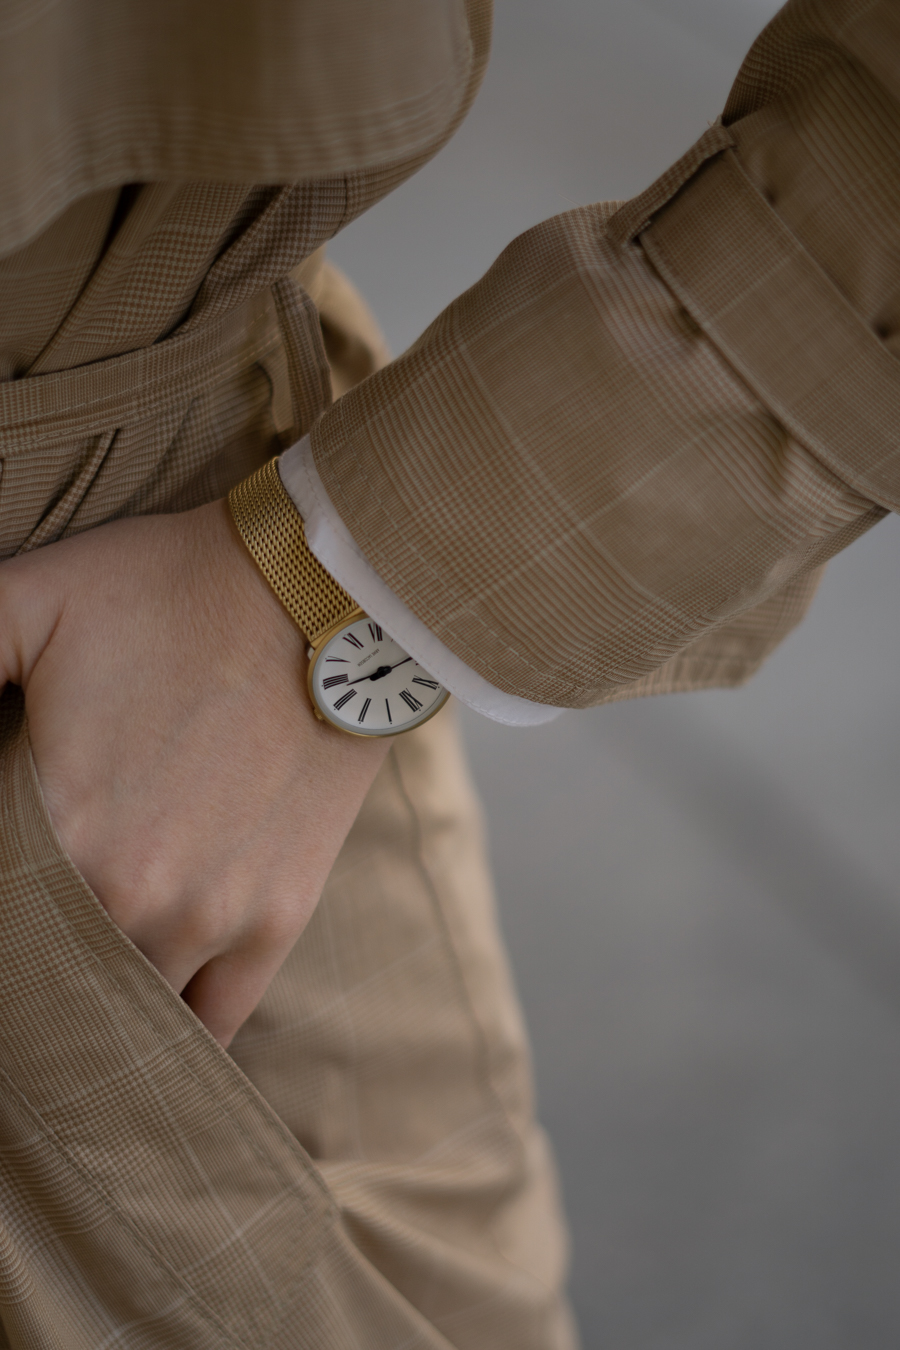 Arne Jacobsen Watches - RG Daily Blog